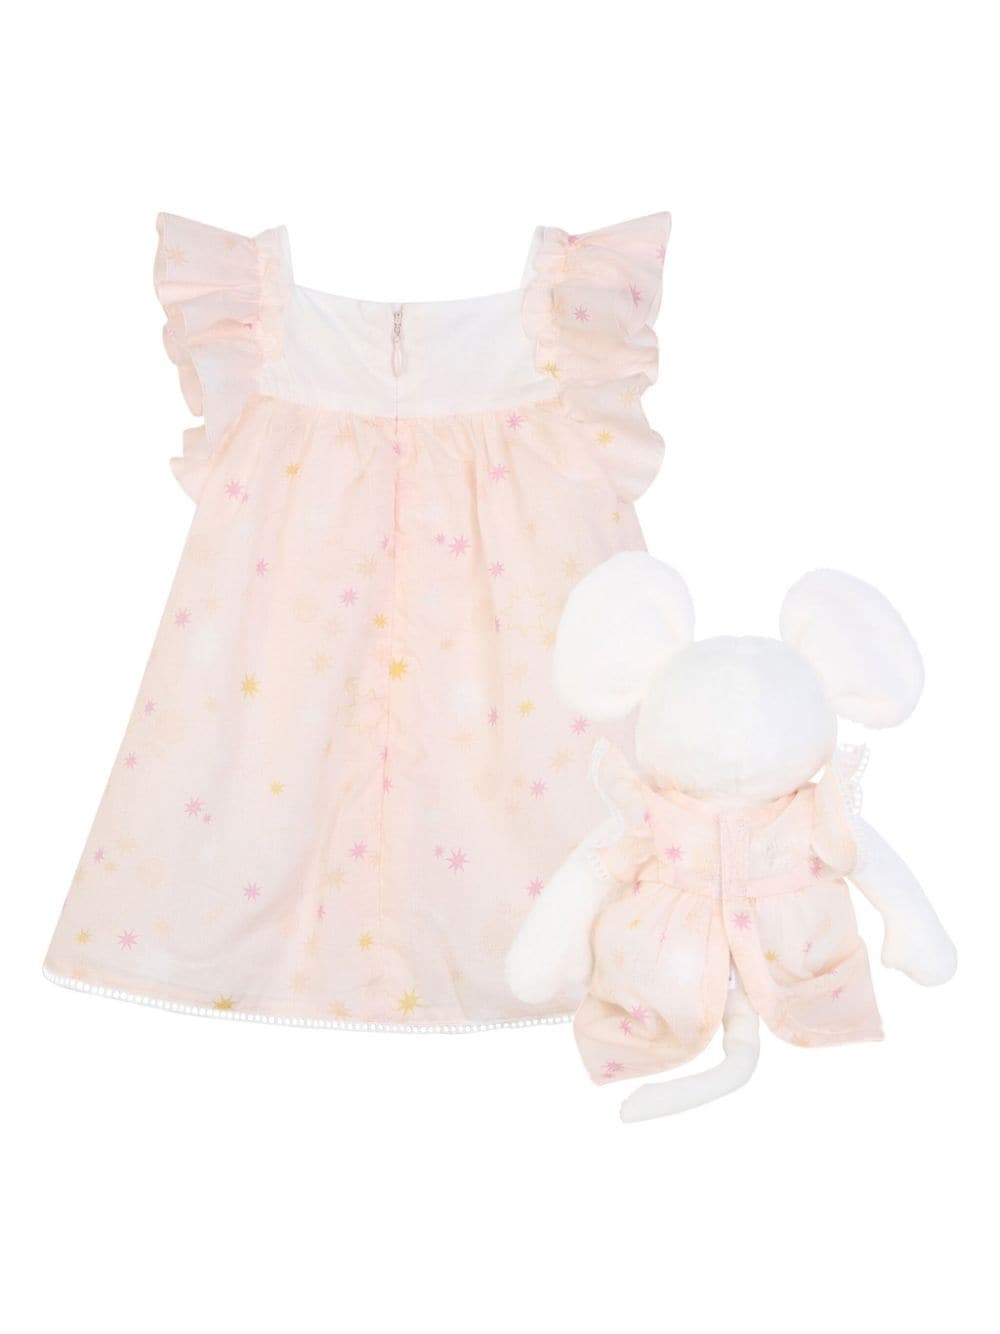 Pink dress for baby girls with stars